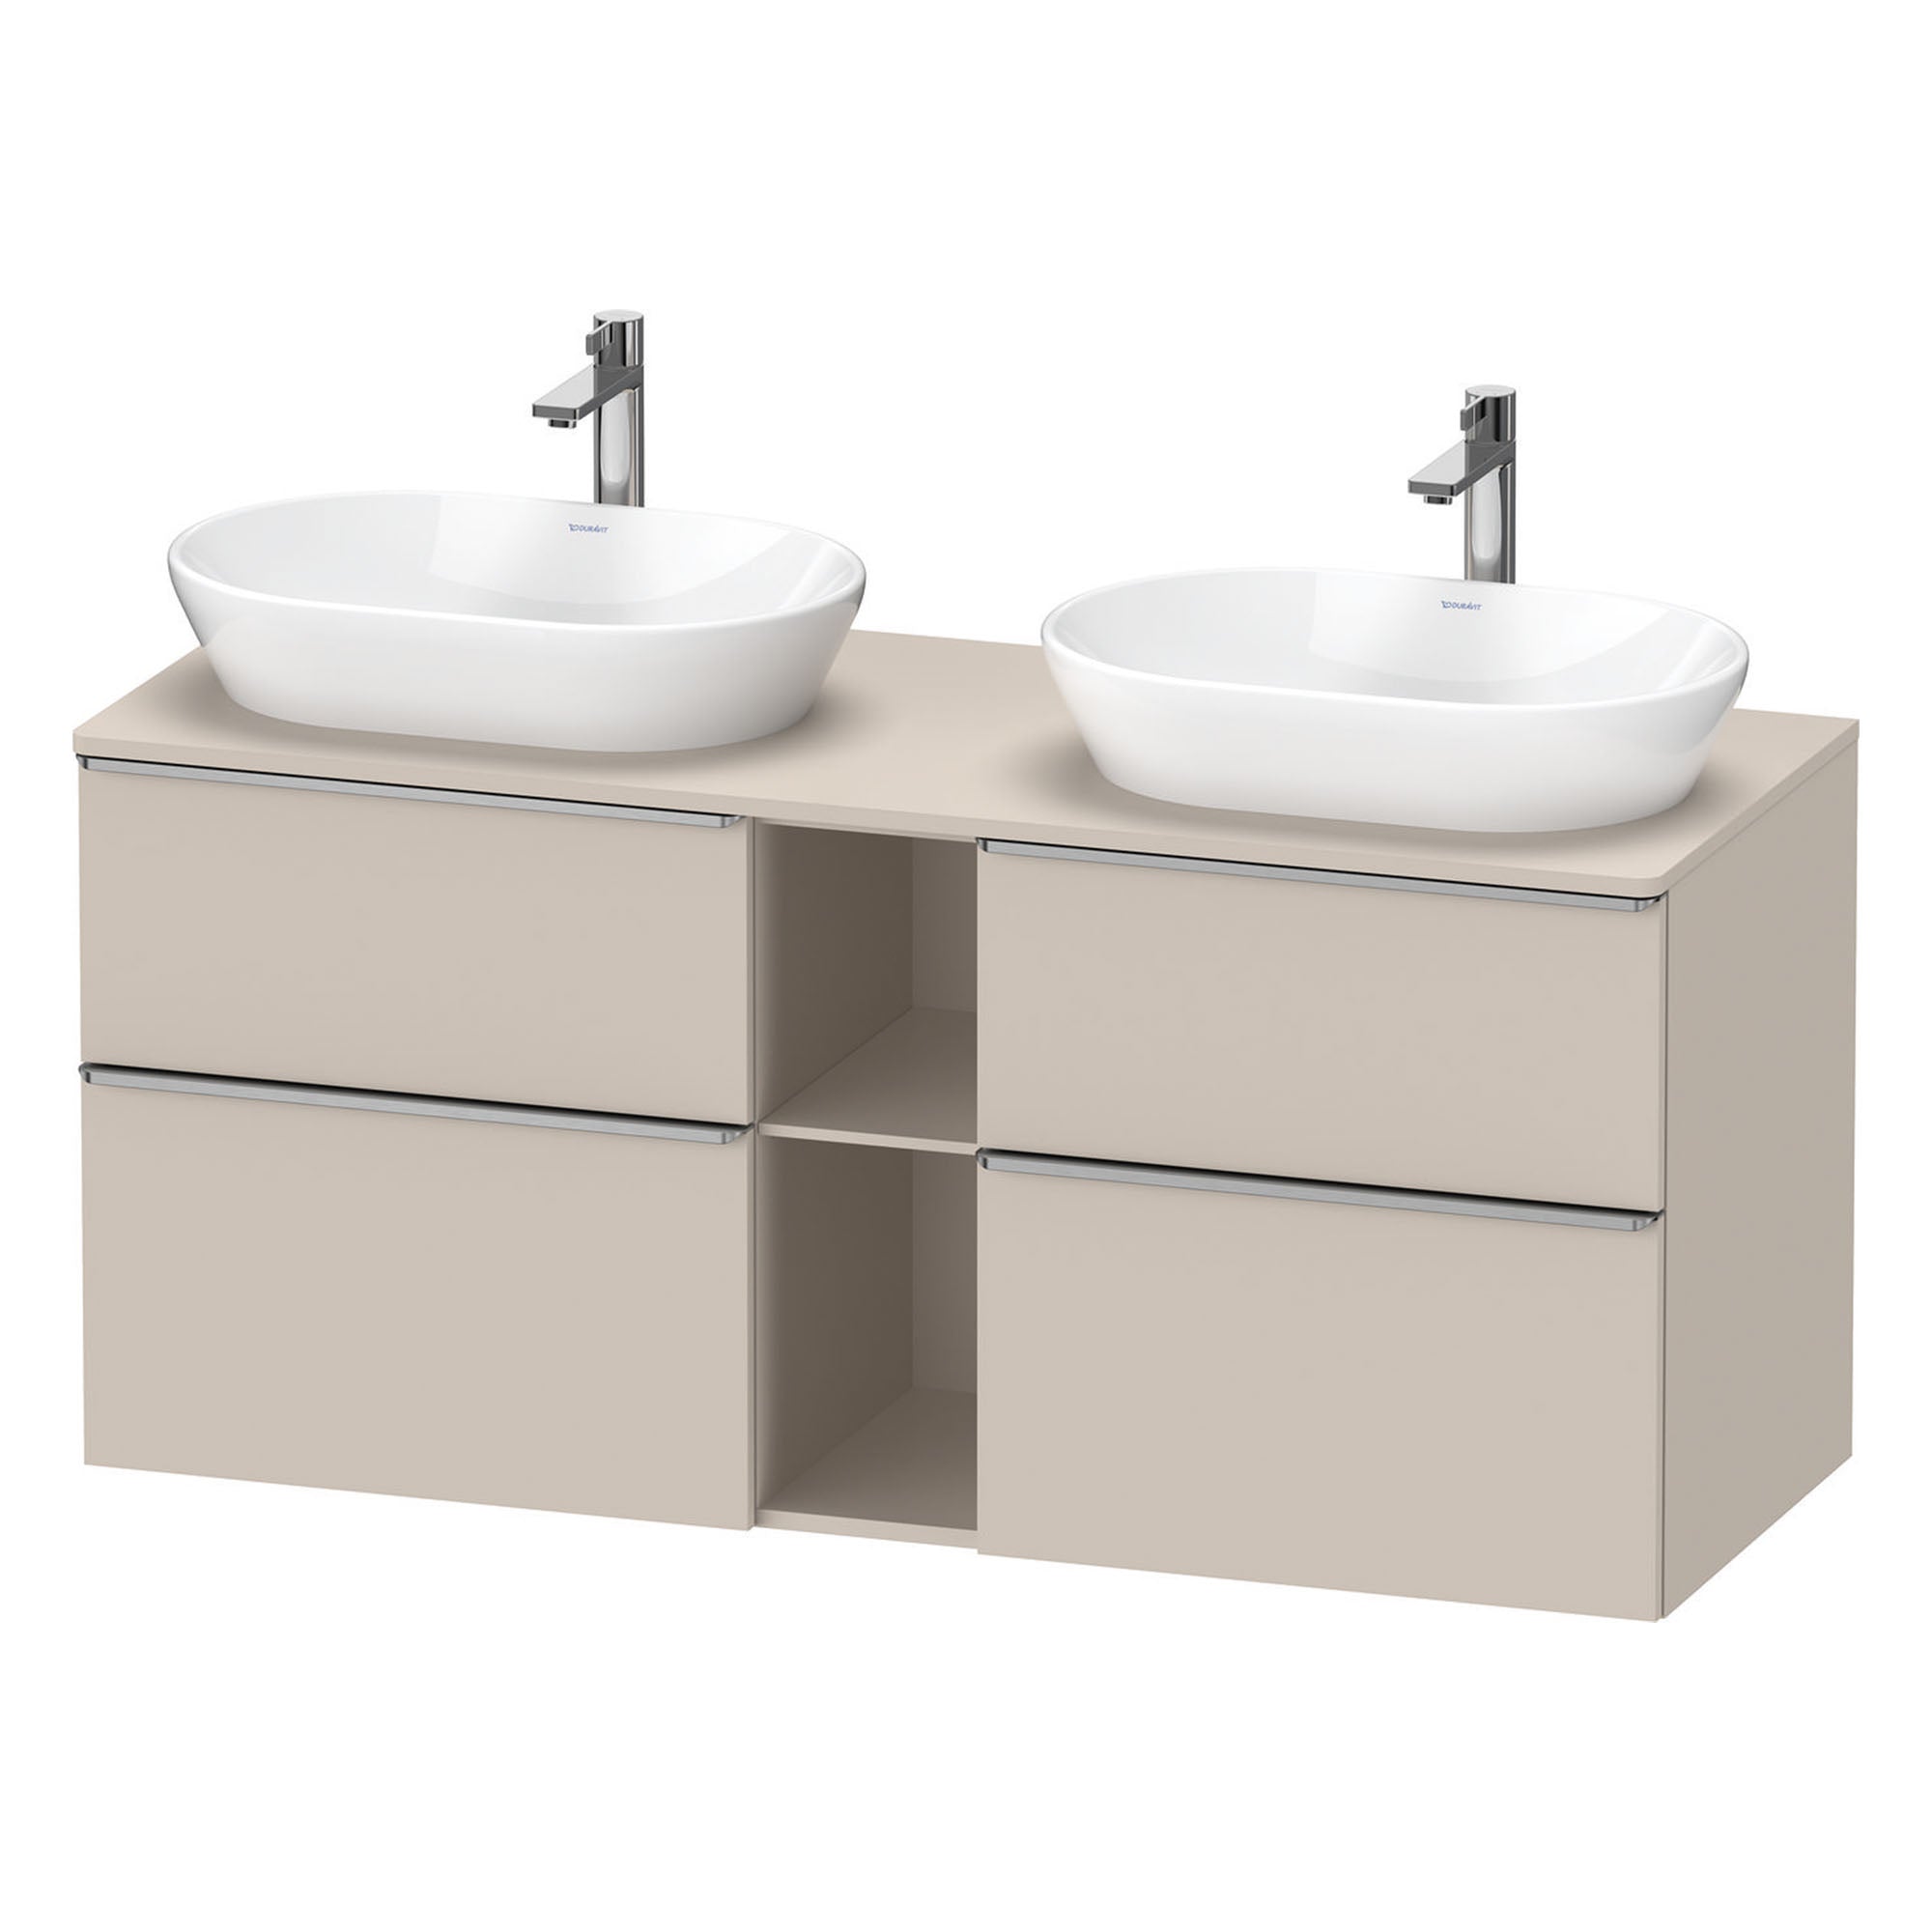 duravit d-neo 1400 wall mounted vanity unit with worktop 2 open shelves taupe stainless steel handles